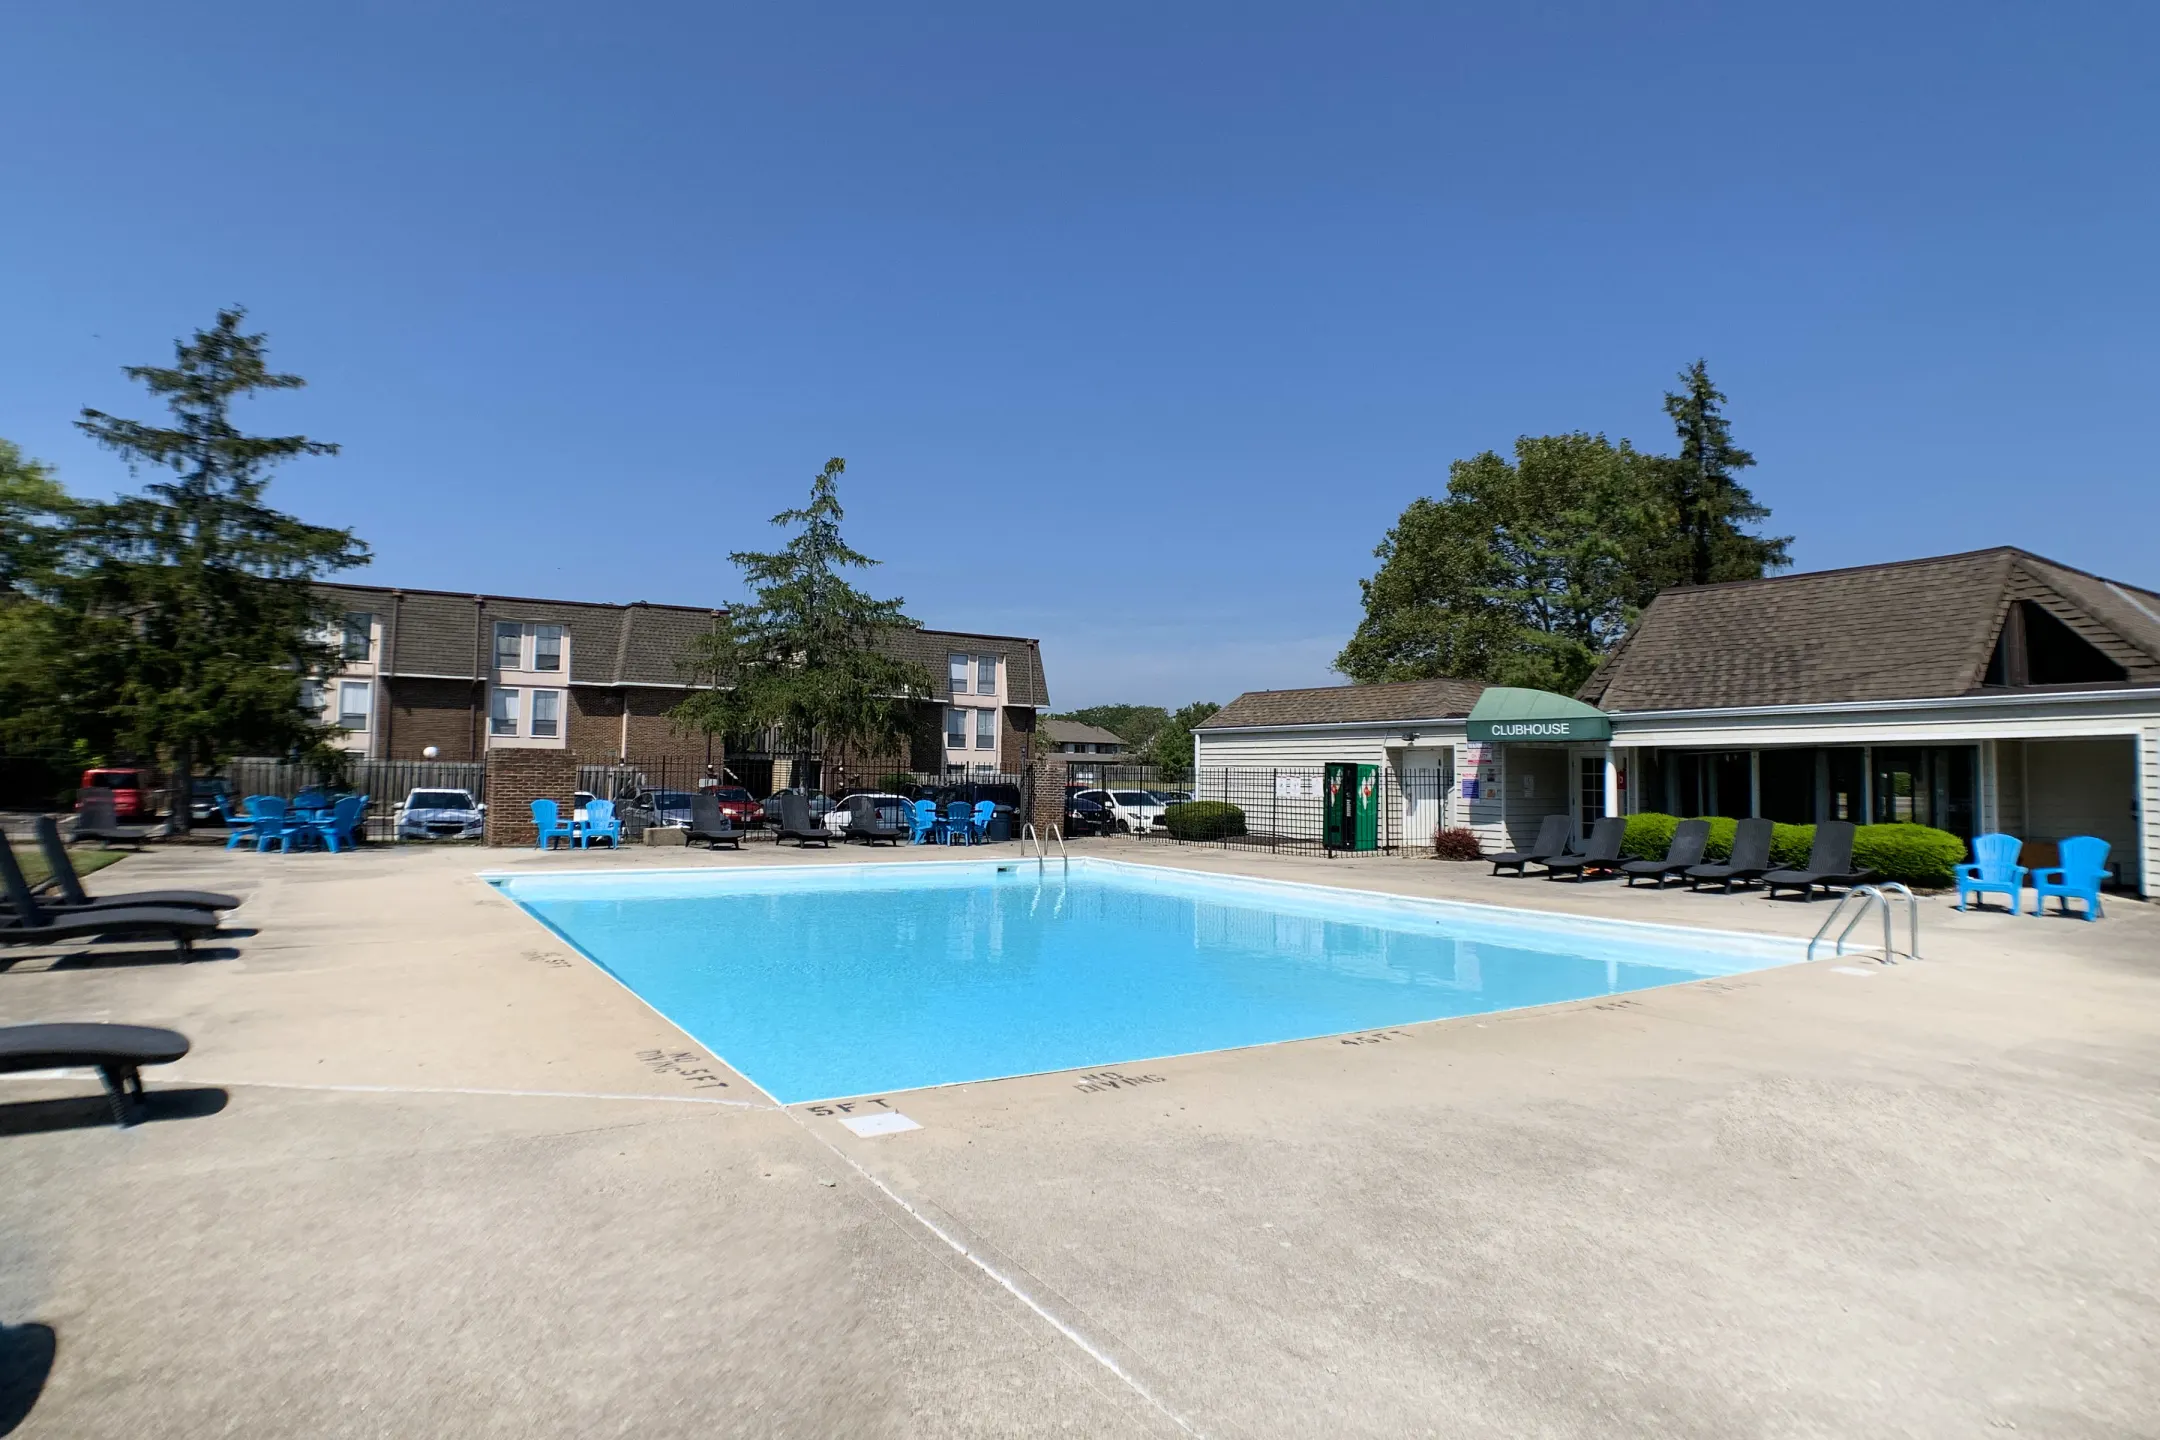 Pool - Miamisburg By The Mall - Miamisburg, OH